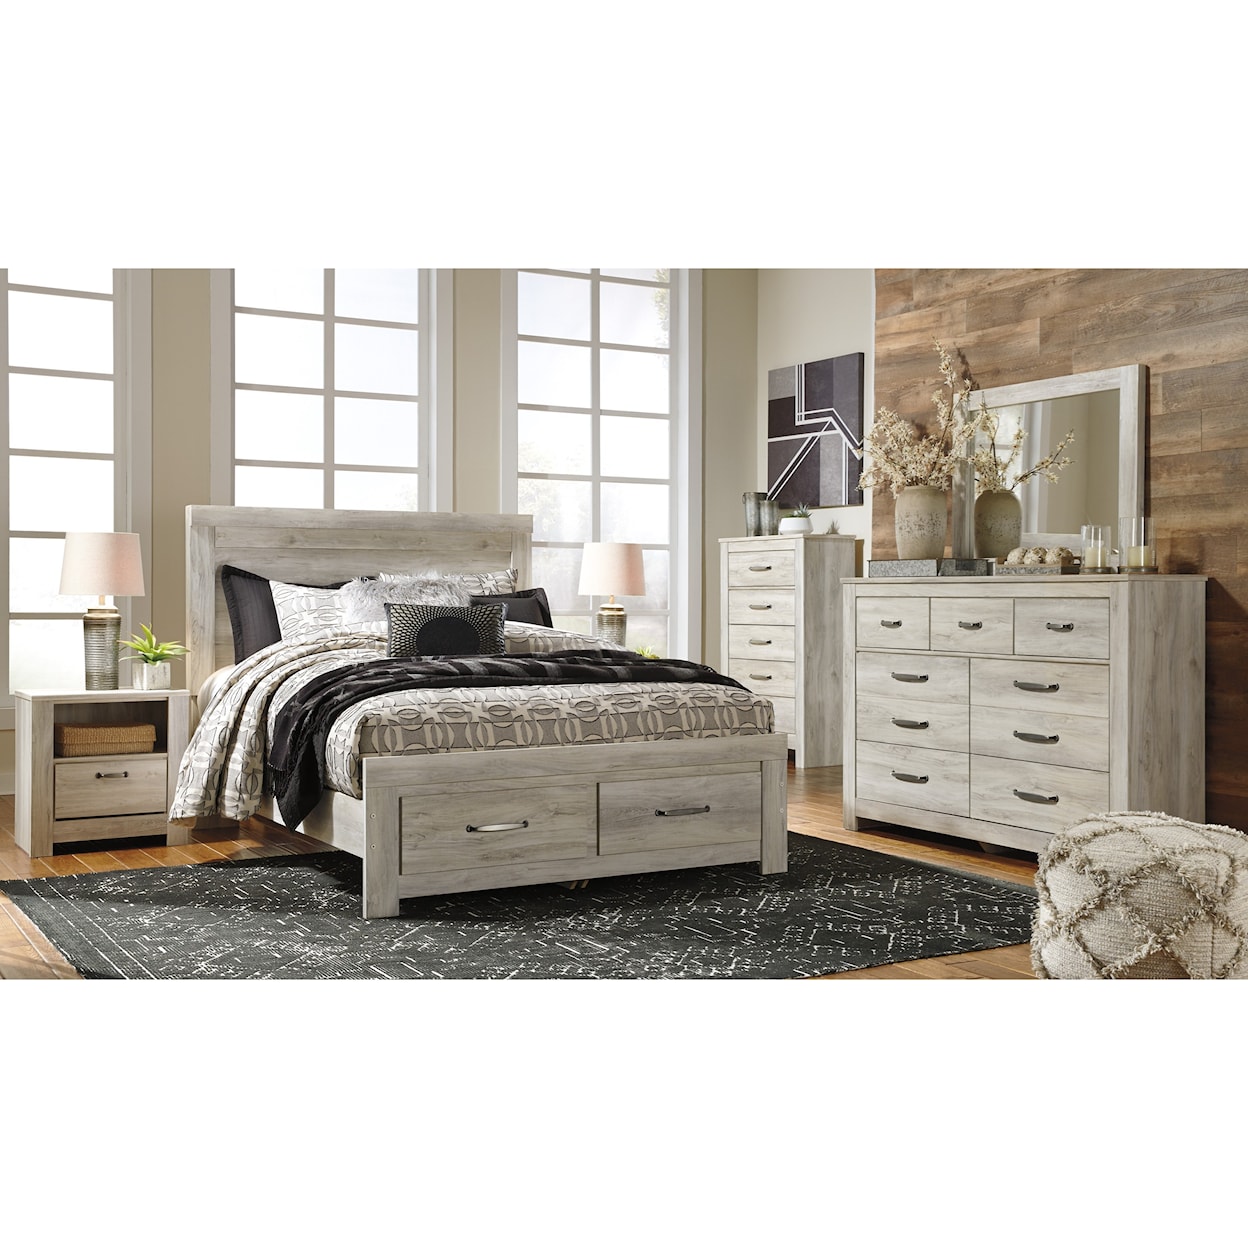 Ashley Signature Design Bellaby Queen Bedroom Group